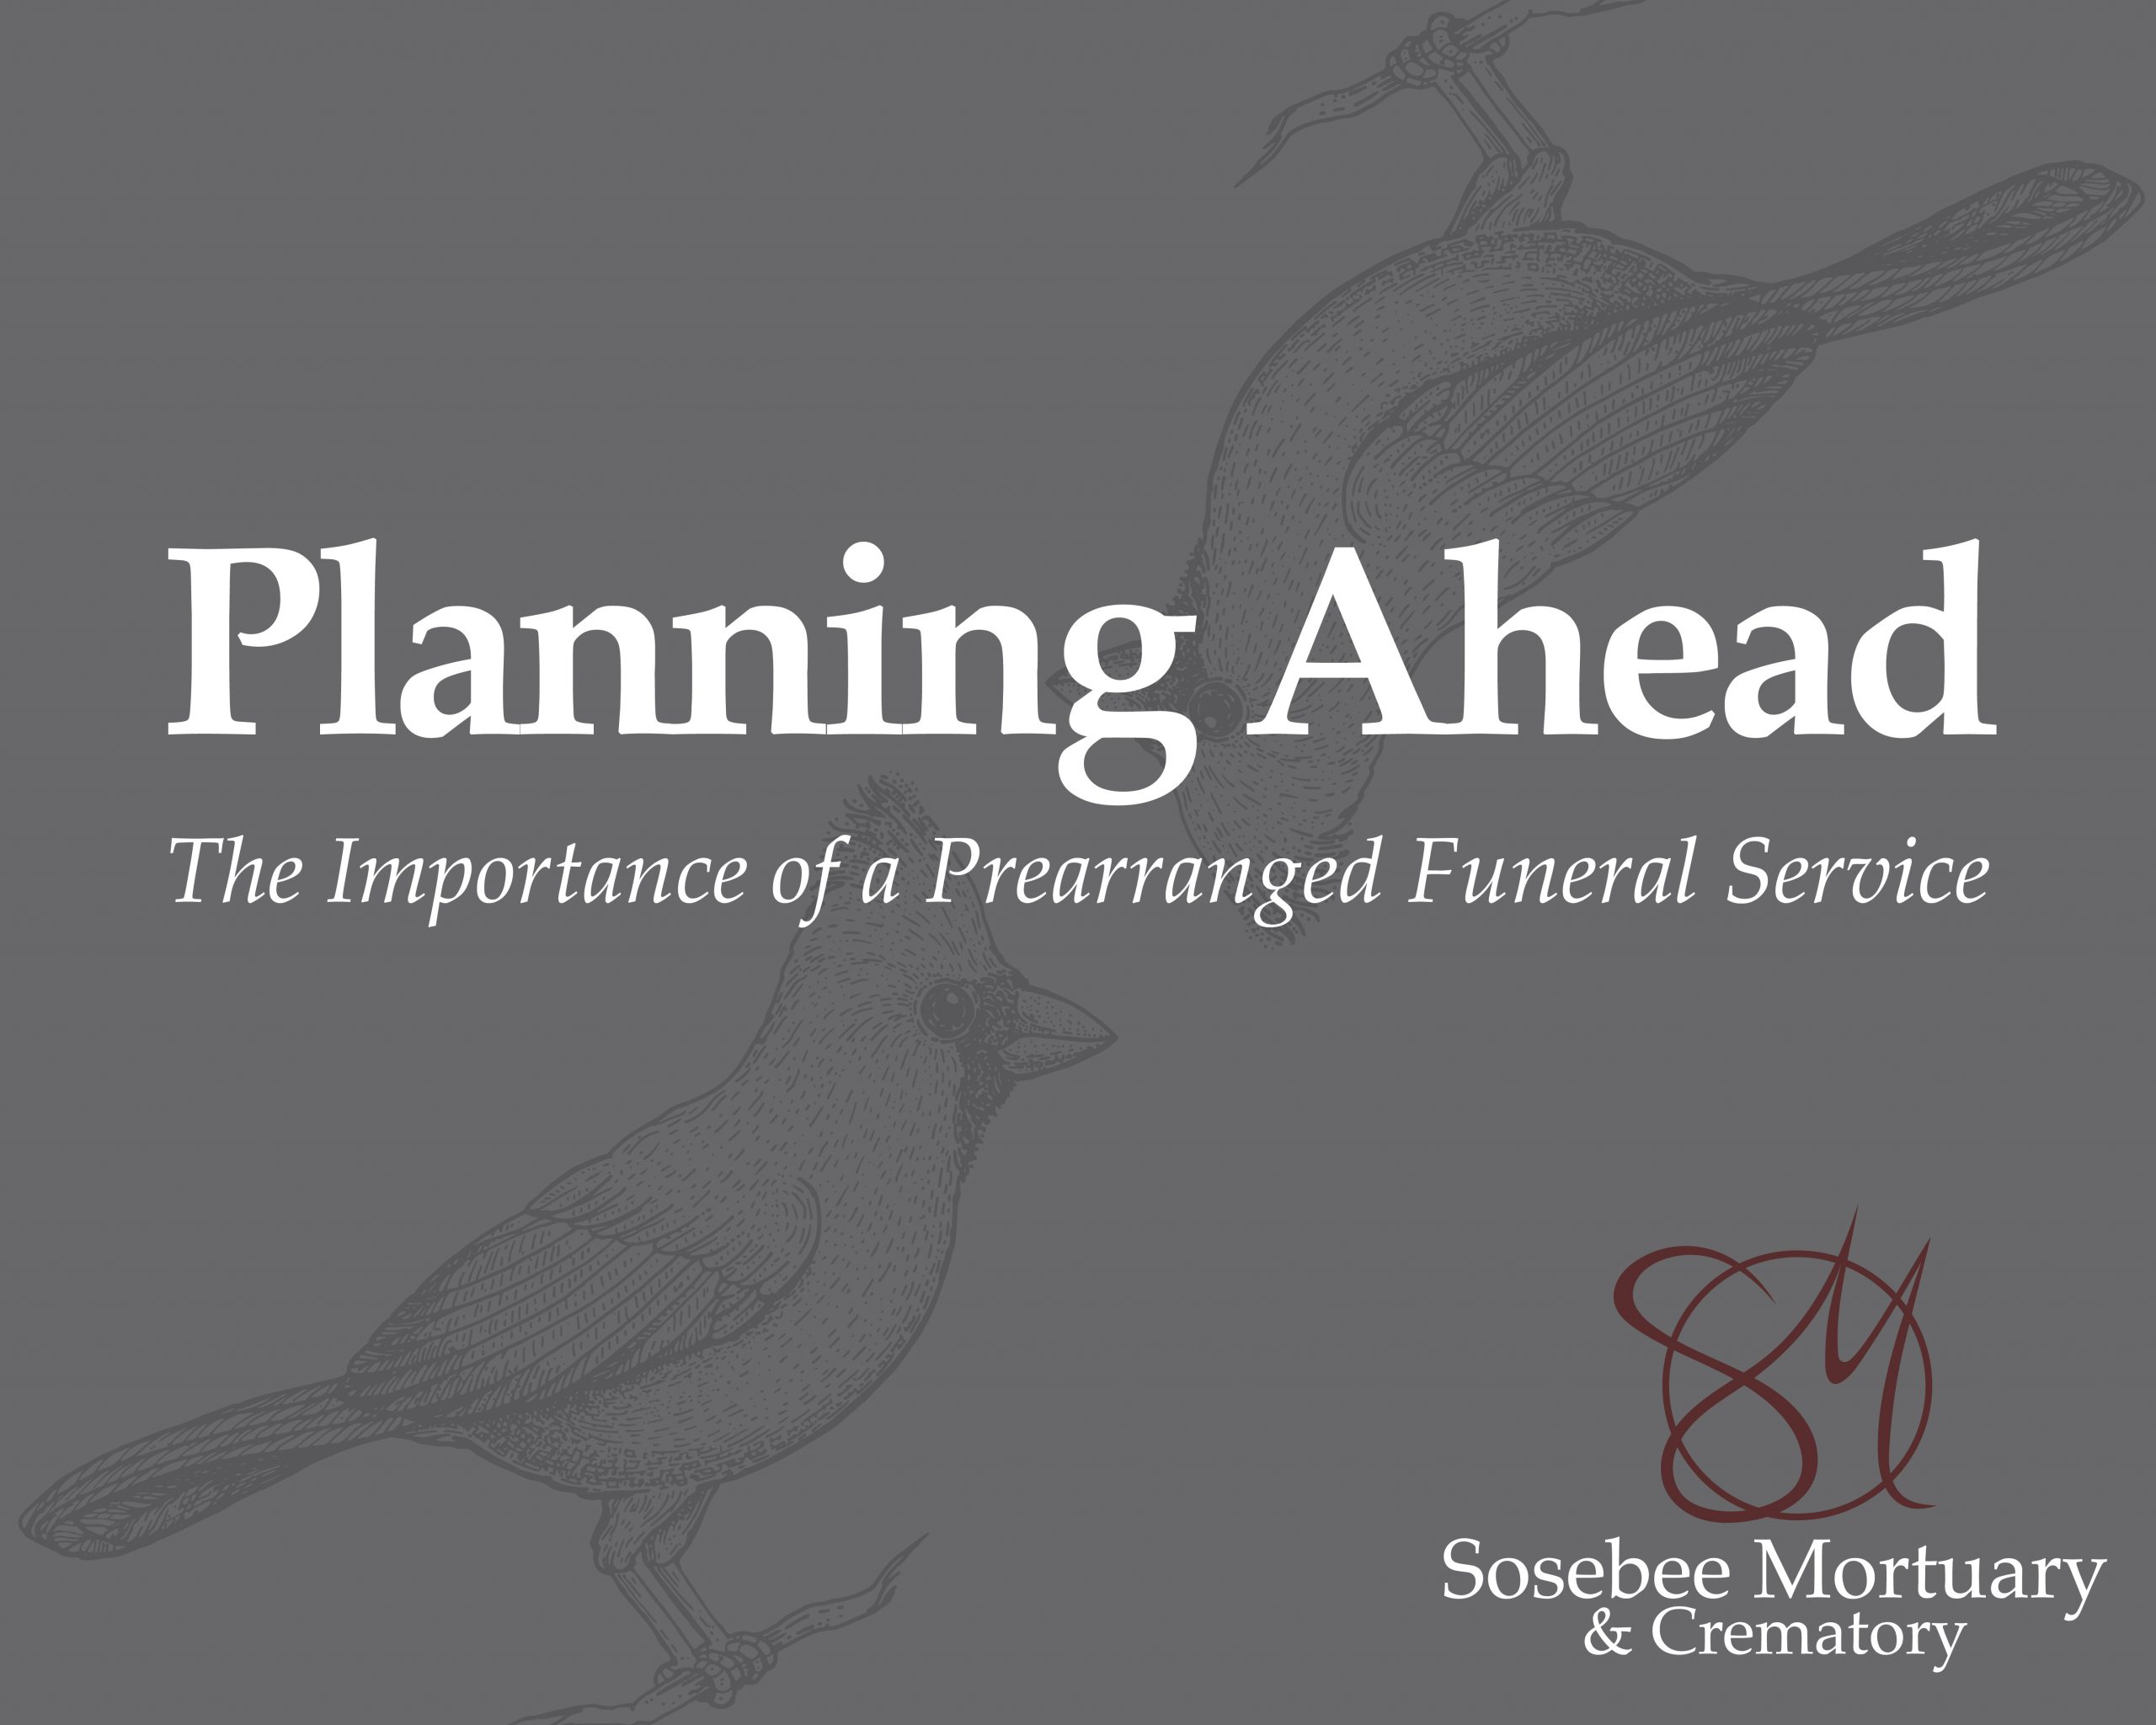 Grey background with a drawing of two birds with the title "Planning Ahead: The Importance of a Prearranged Funeral Service" and Sosebee Mortuary logo.